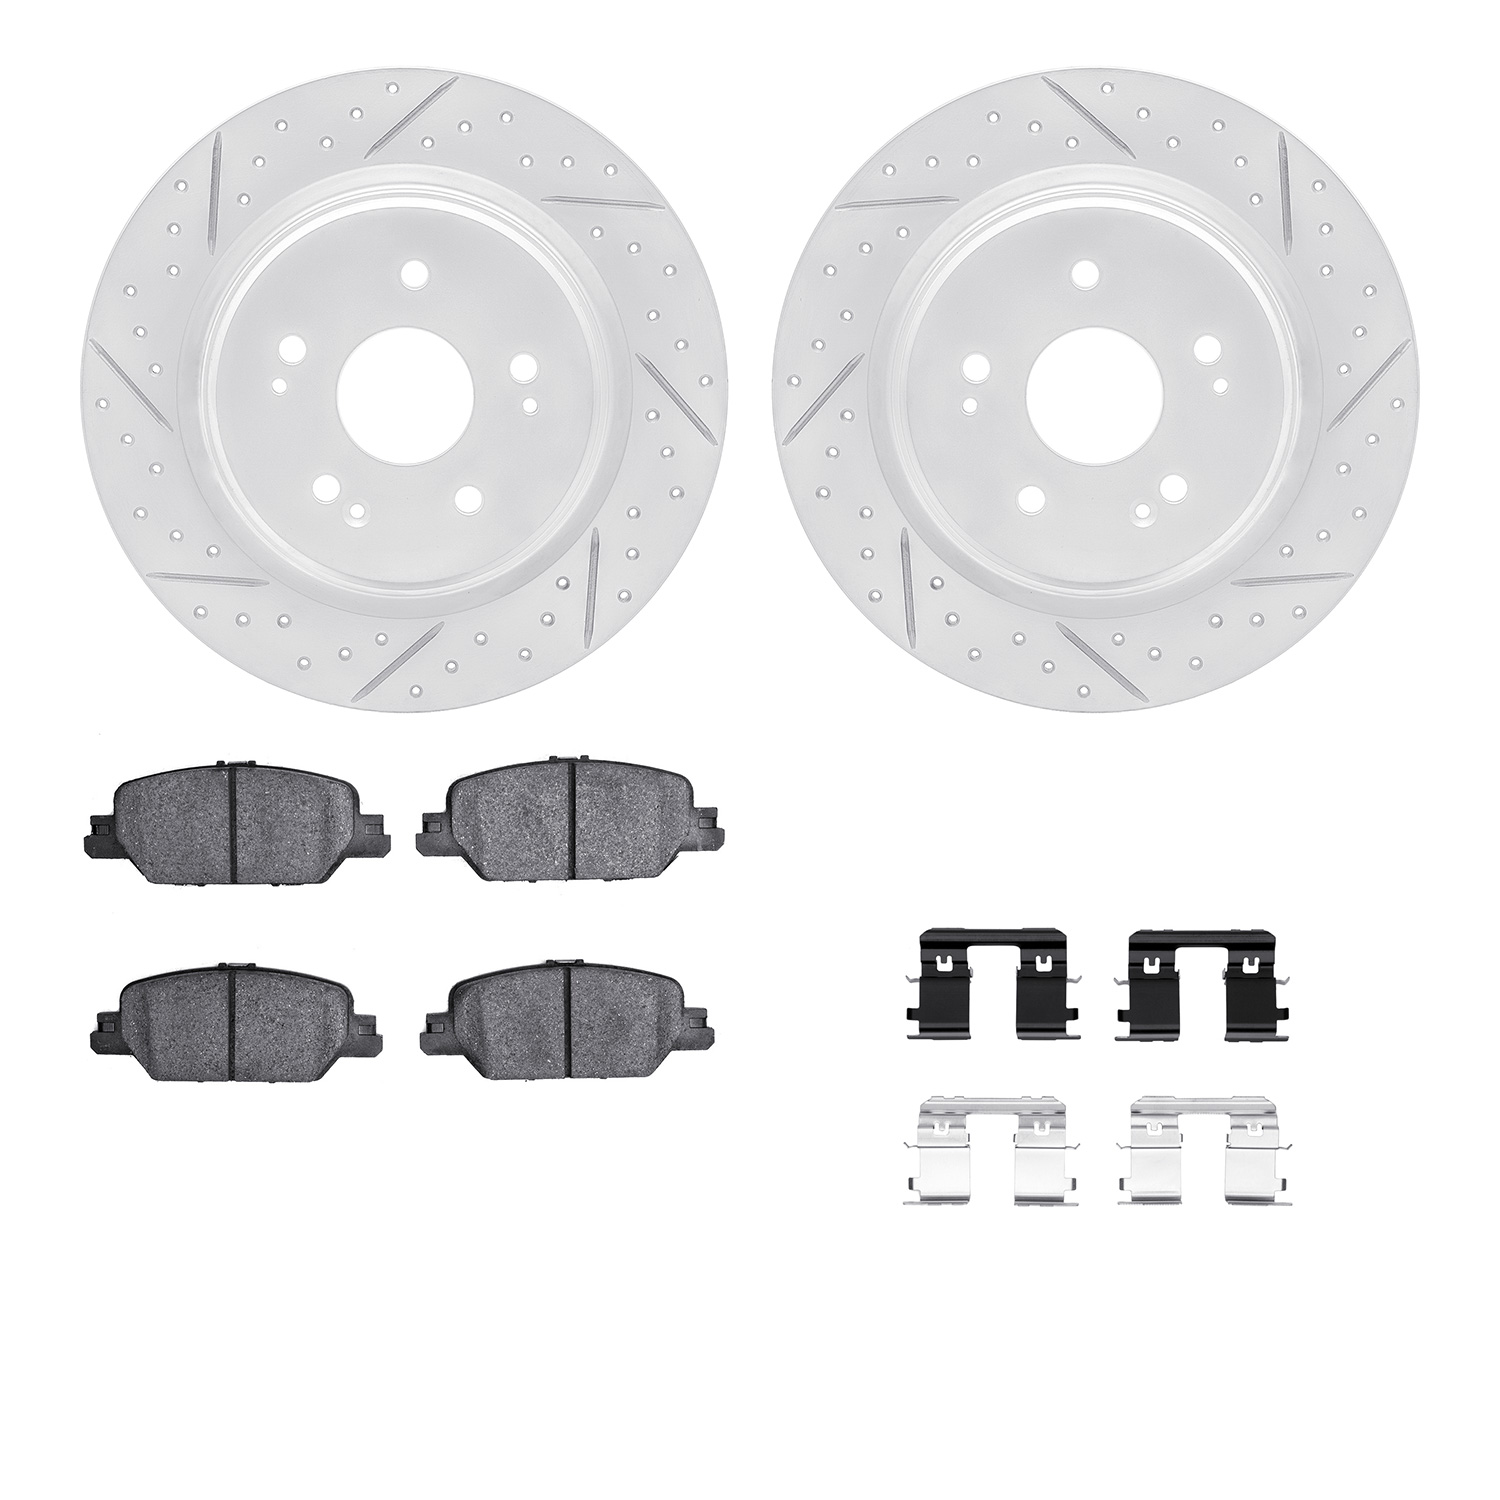 2512-58034 Geoperformance Drilled/Slotted Rotors w/5000 Advanced Brake Pads Kit & Hardware, Fits Select Acura/Honda, Position: R